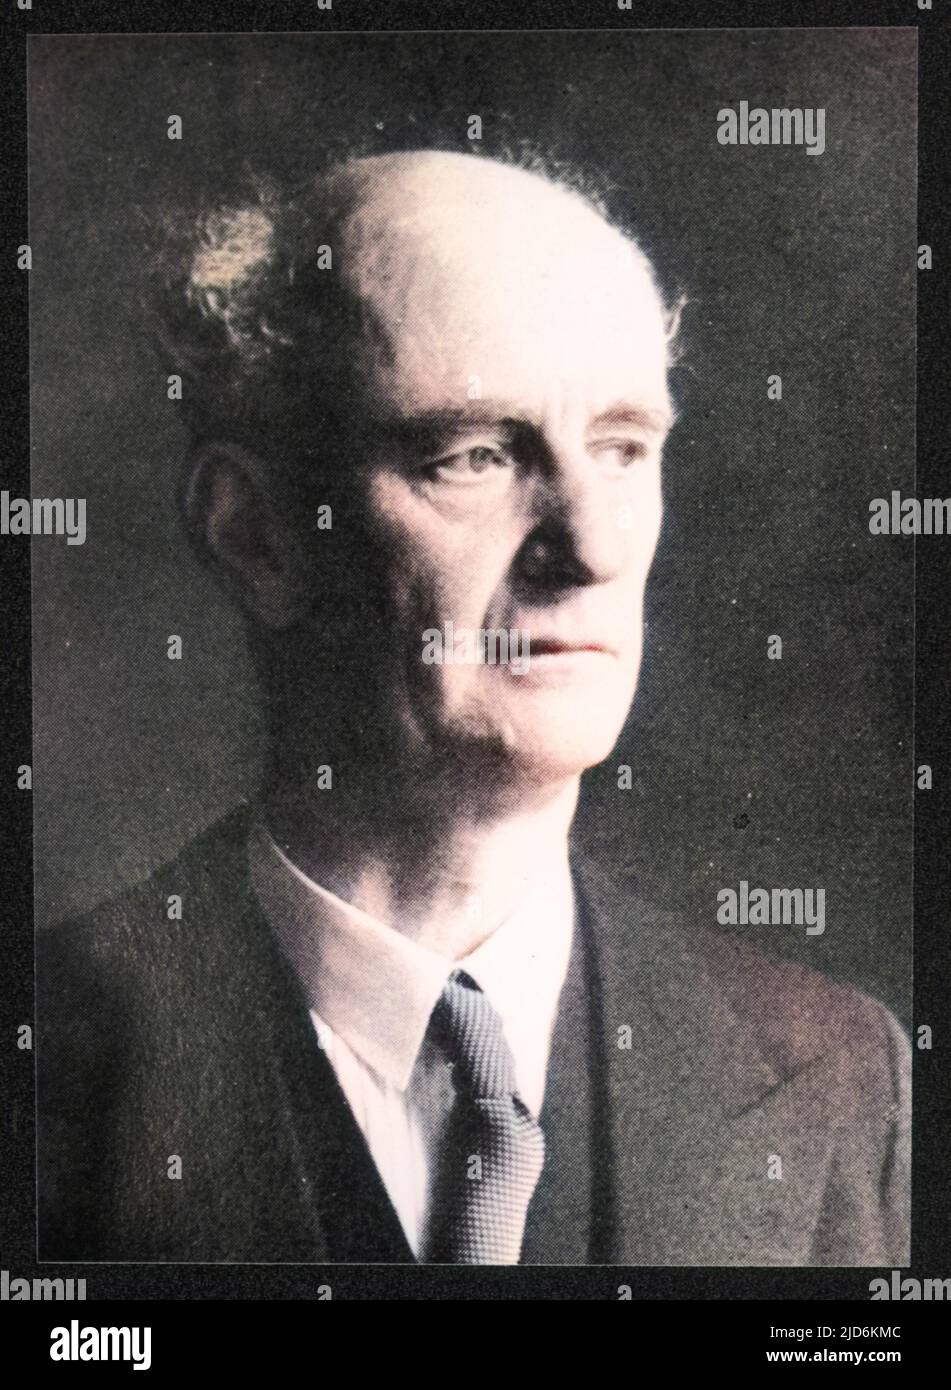 WILHELM FURTWANGLER Widely recognised as one of the great musical conductors of the twentieth century. Colourised version of: 10062949       Date: 1886 - 1954 Stock Photo